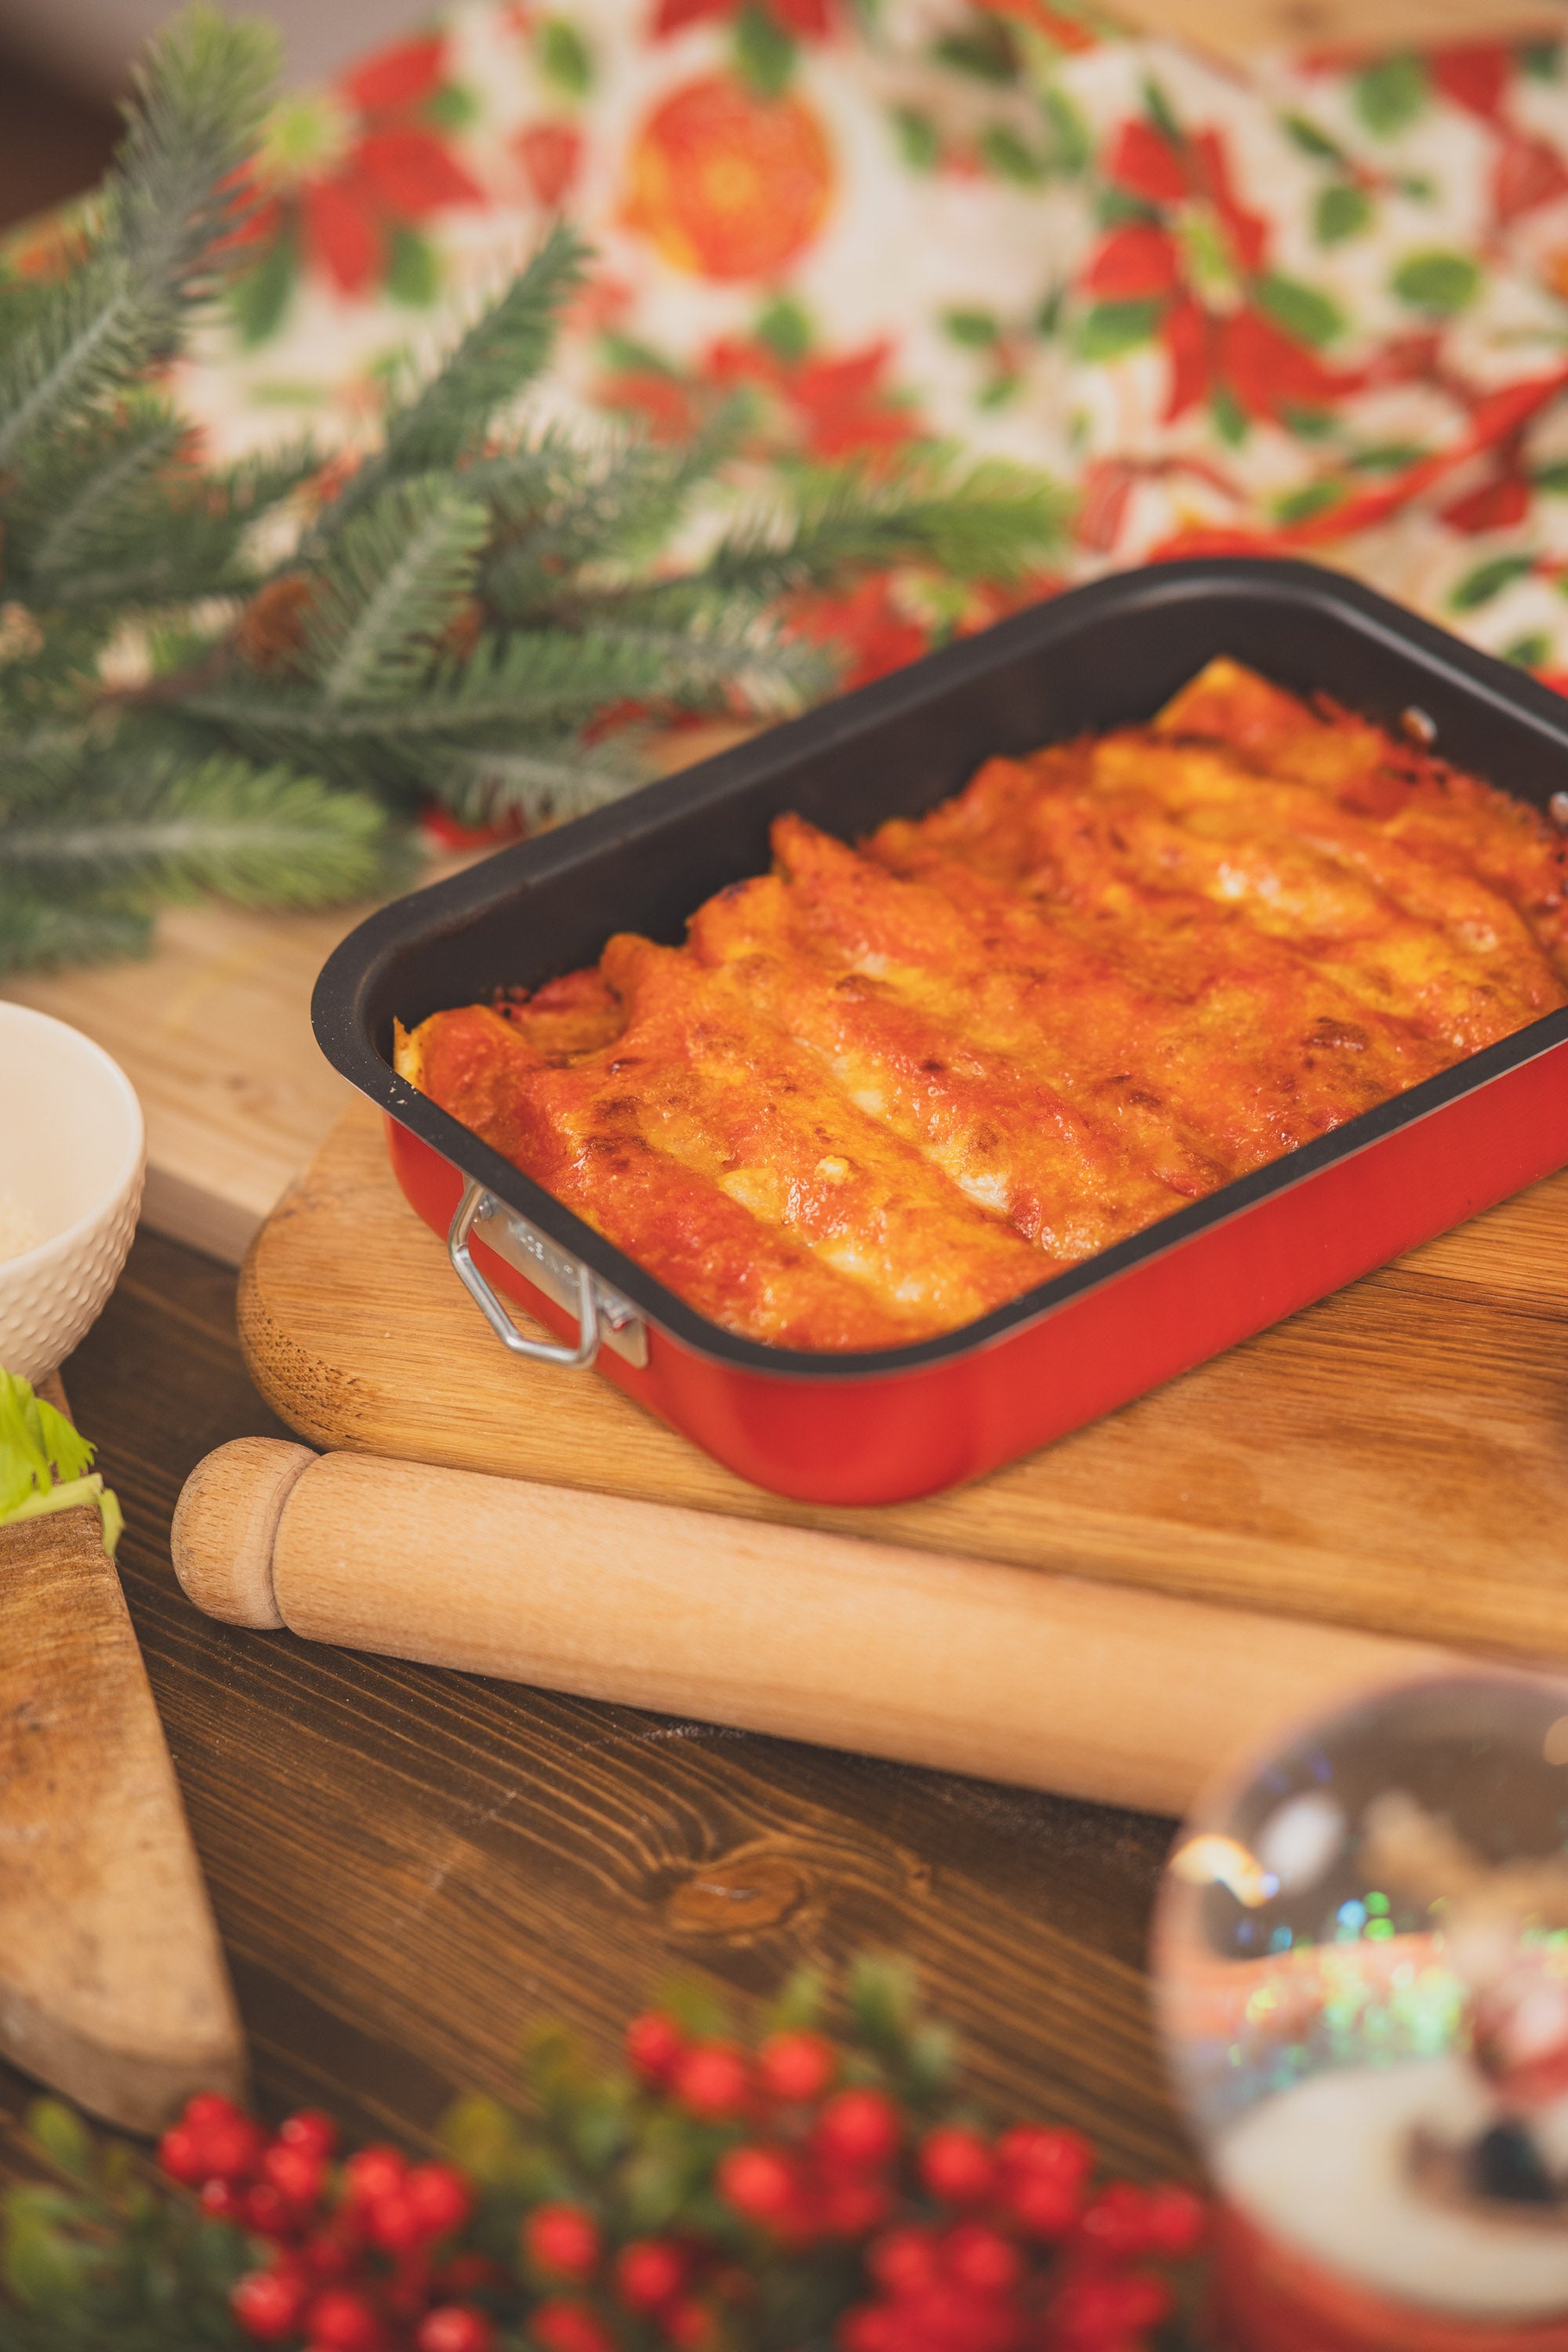 On demand: Classic Cannelloni